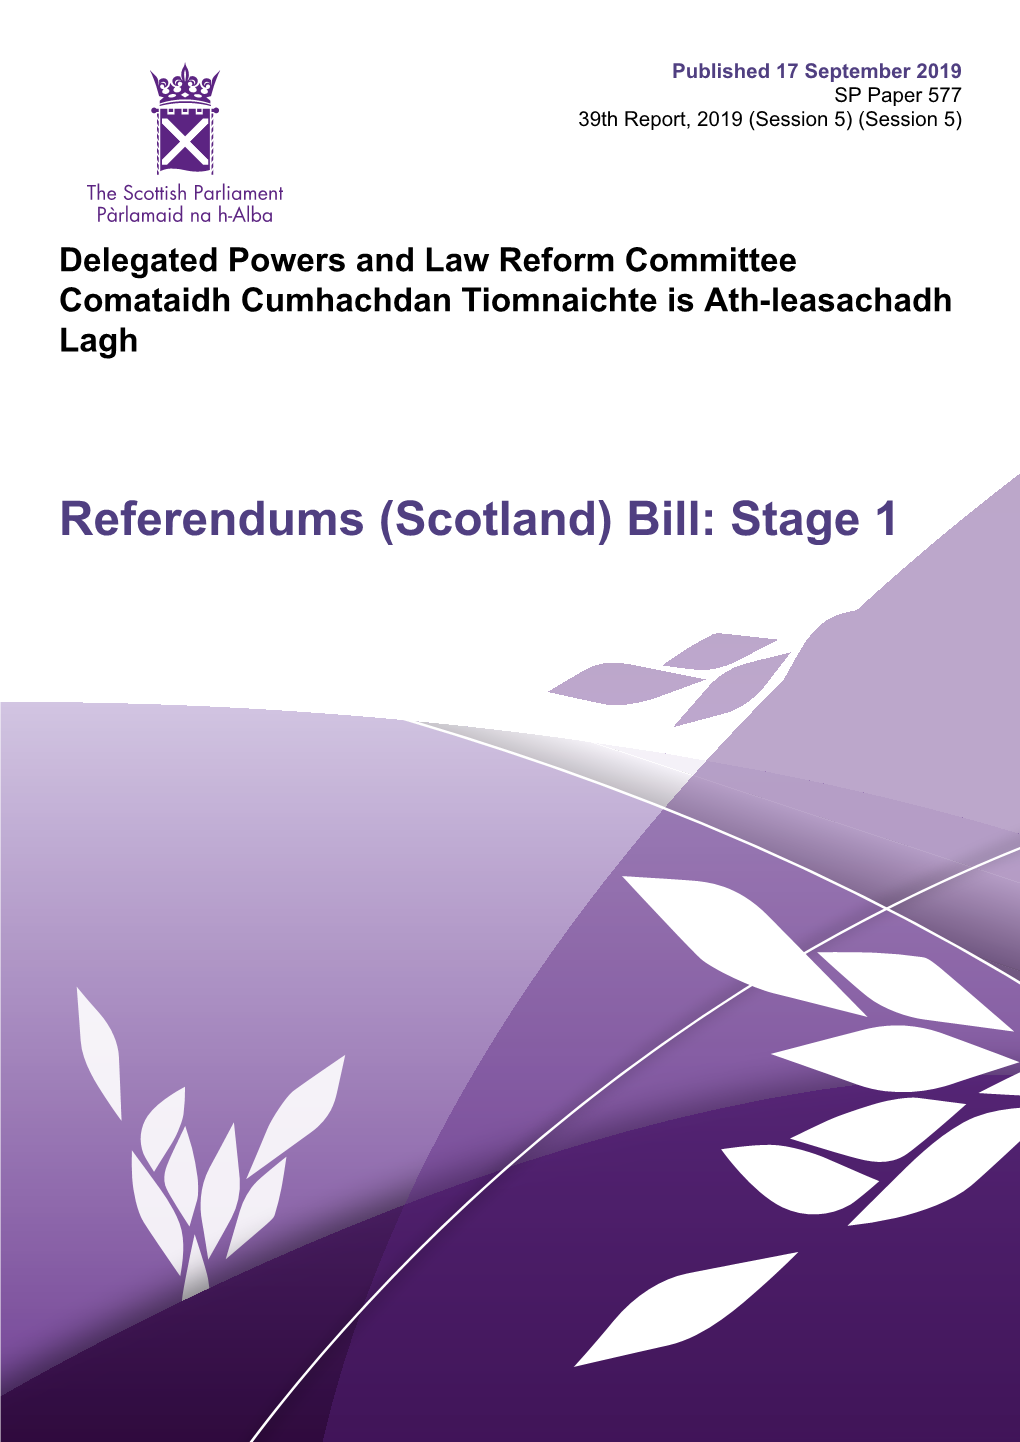 Referendums (Scotland) Bill: Stage 1 Published in Scotland by the Scottish Parliamentary Corporate Body